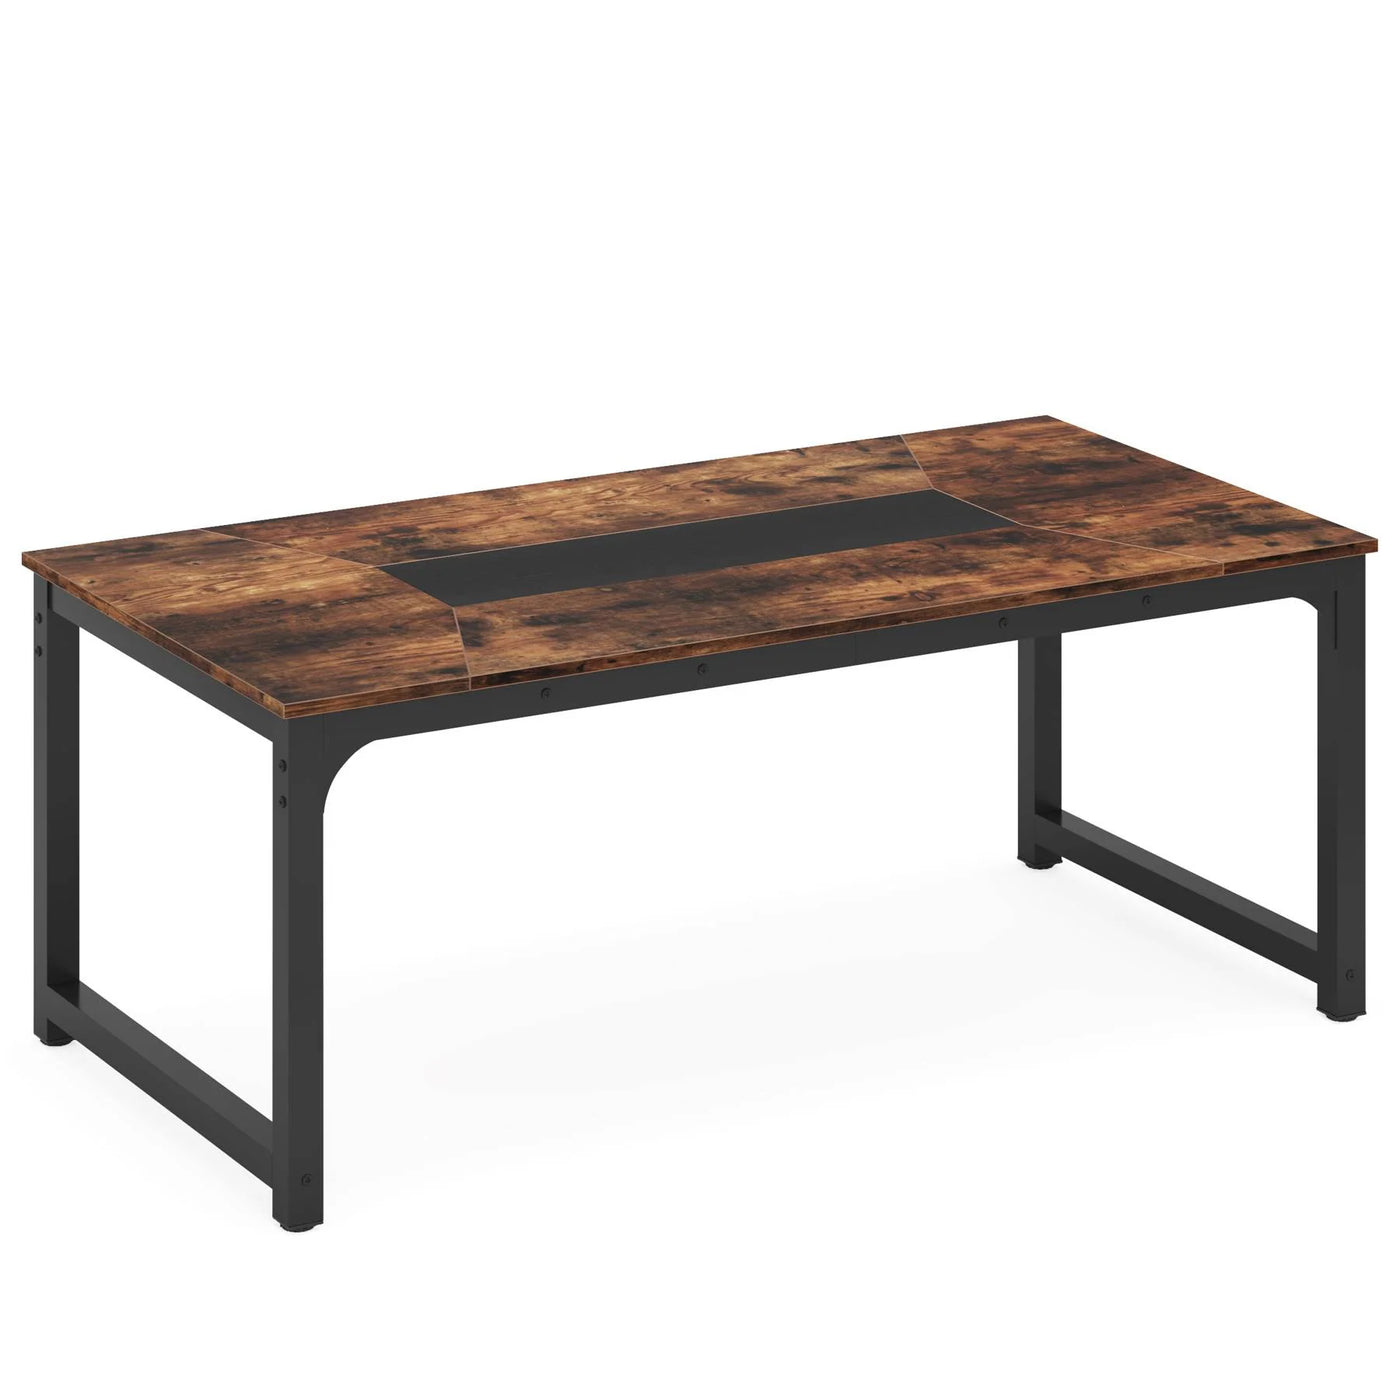 Kate Dining Table for 6-8 Persons | Industrial Kitchen Table with Metal Frame